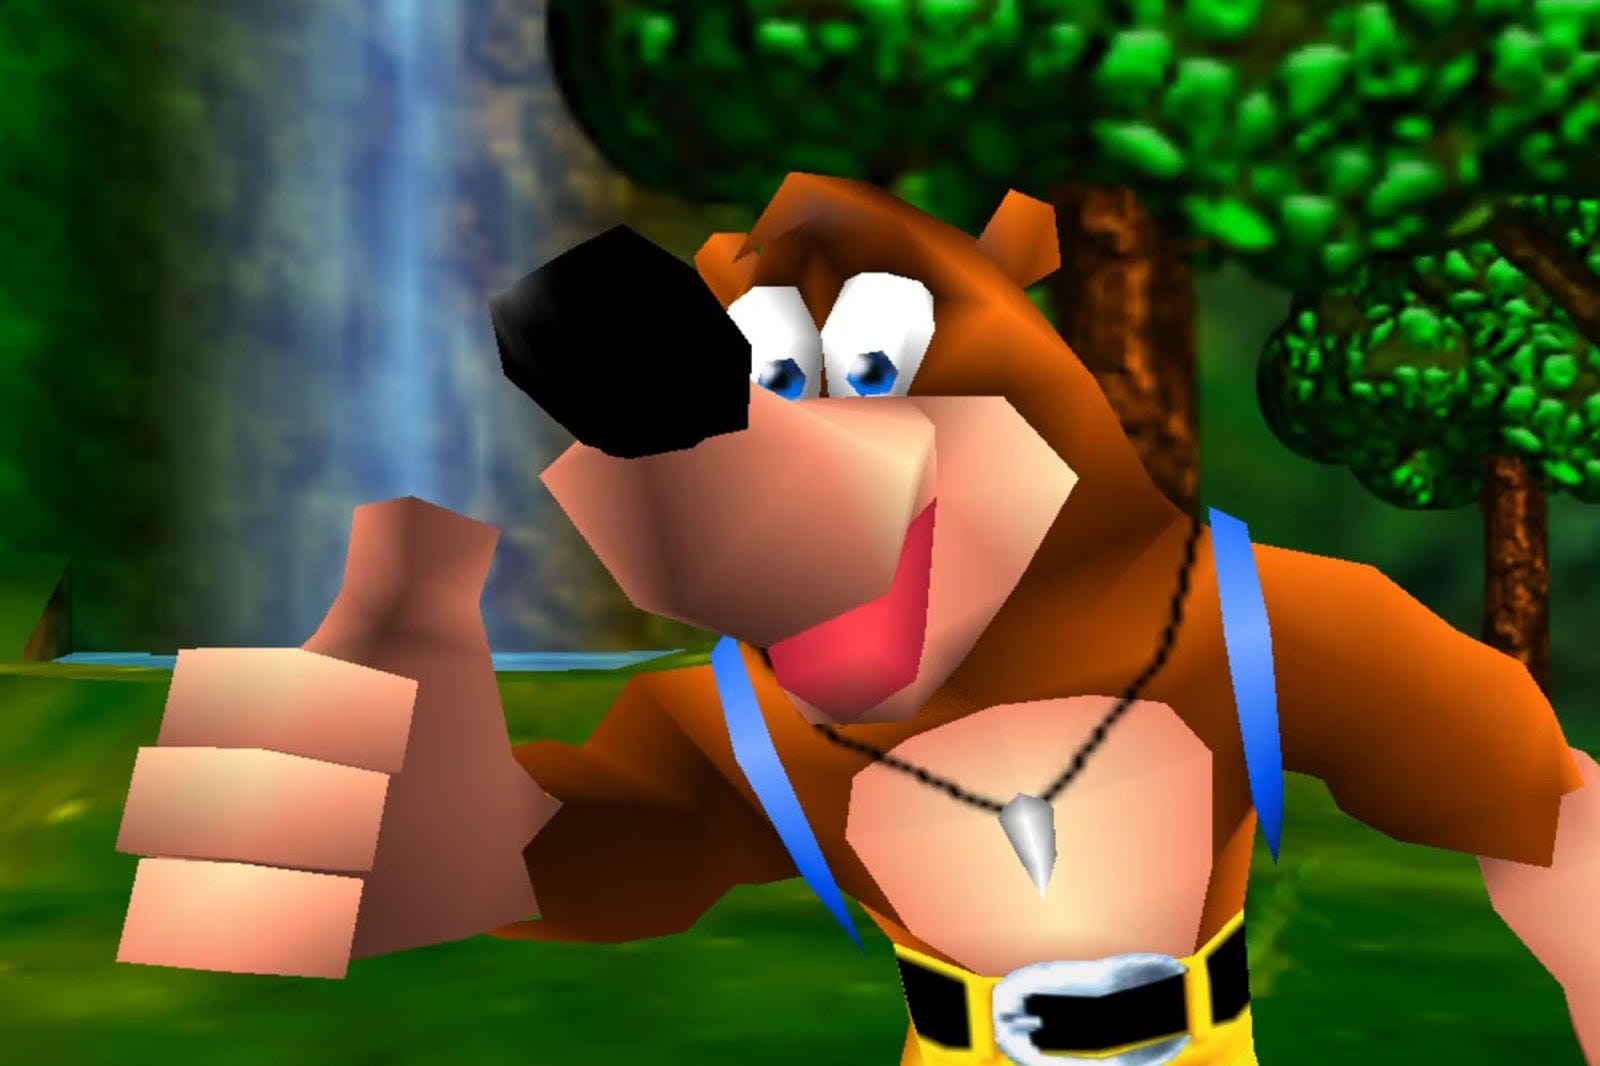 Rewind: Banjo-Kazooie. Or: How I Learned to Play Video Games…, by  Doublejump, Doublejump